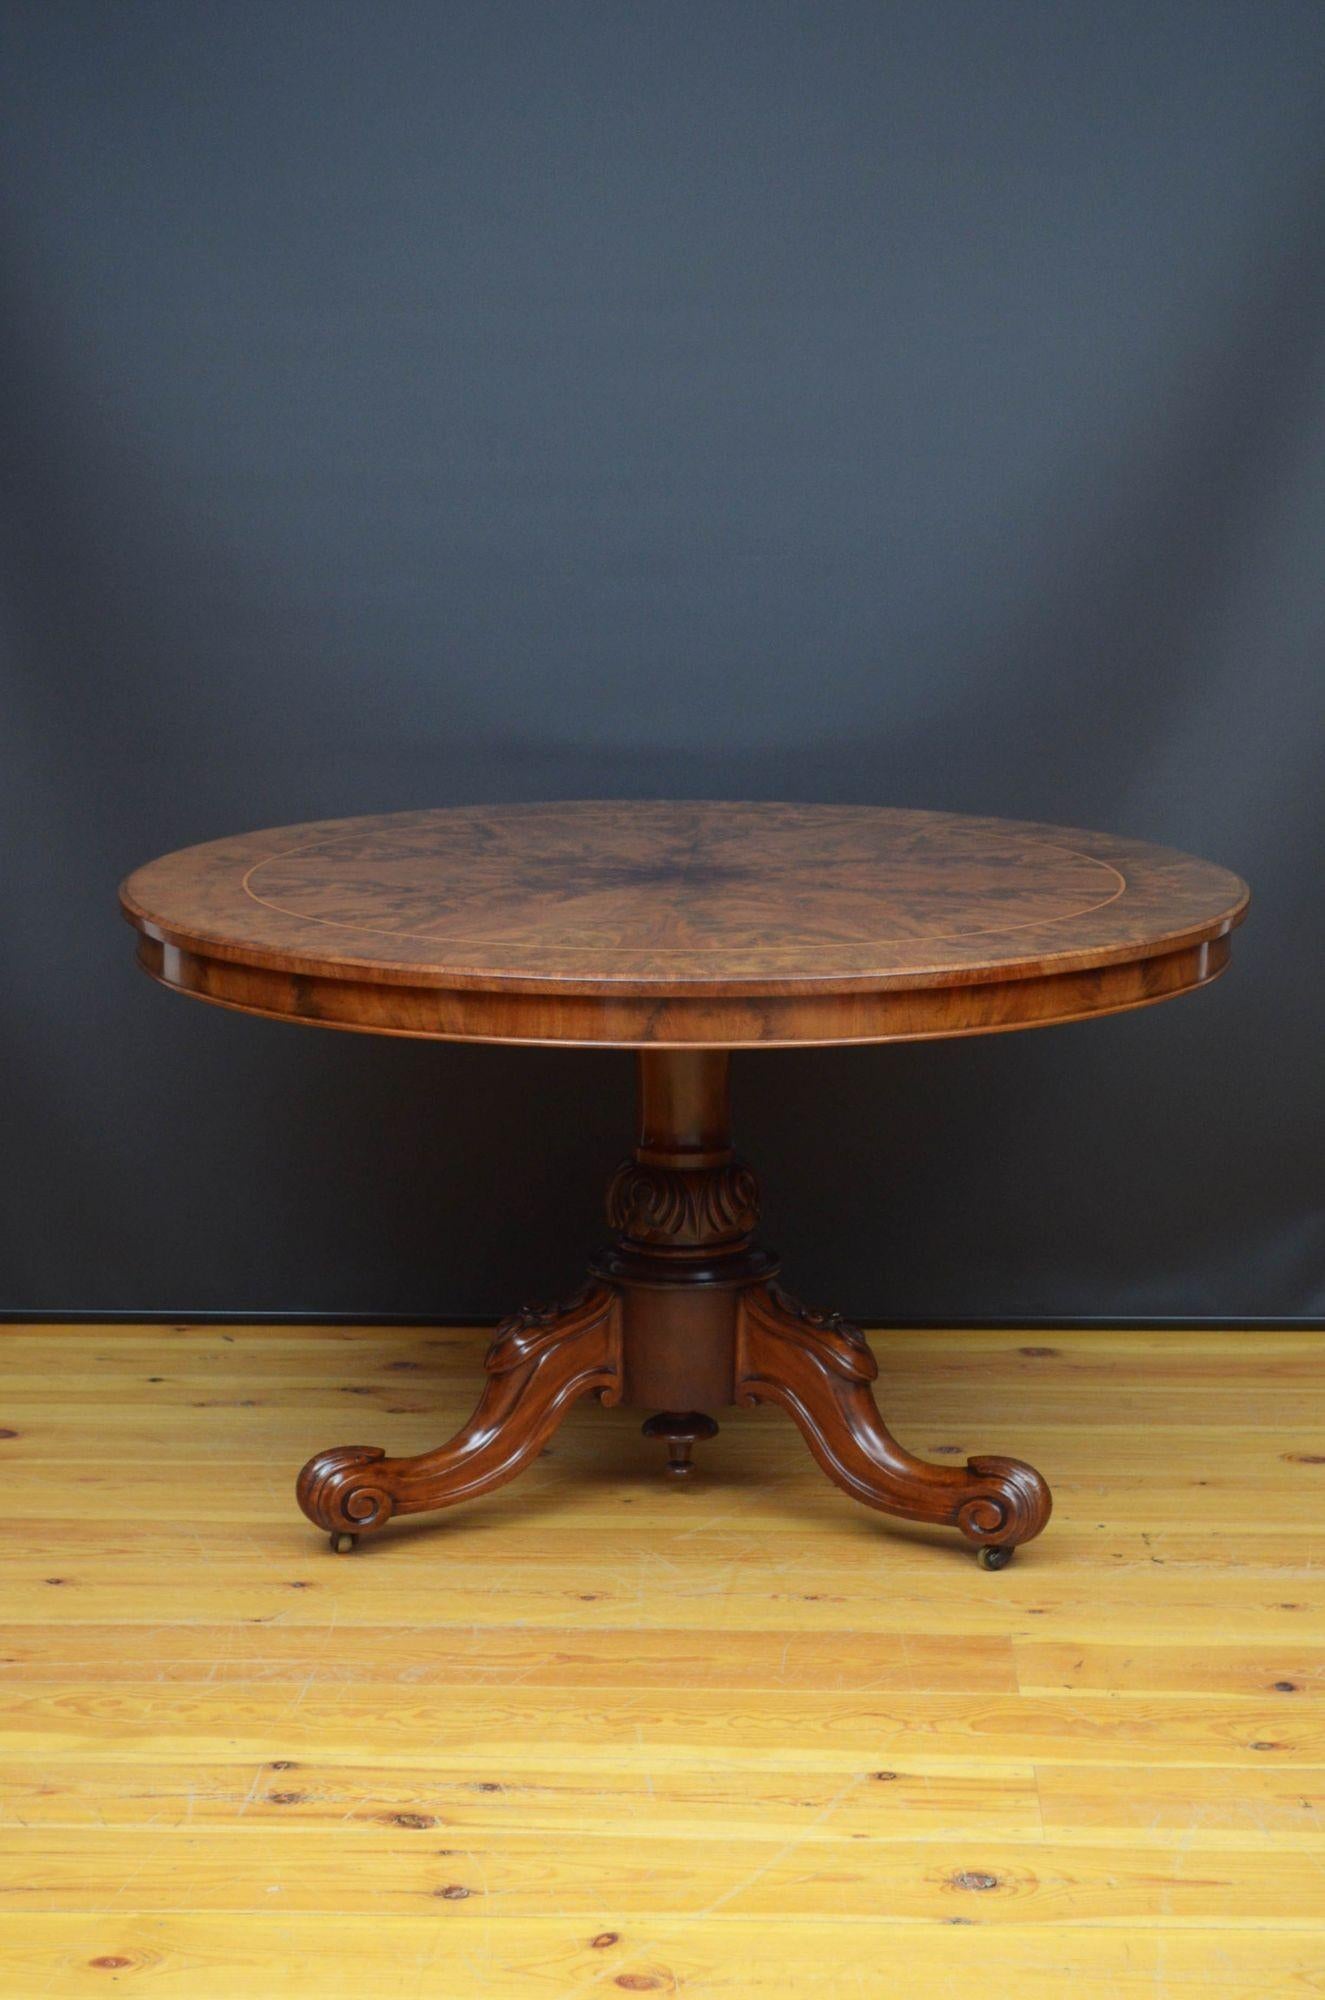 Outstanding Victorian Centre Table / Dining Table In Good Condition For Sale In Whaley Bridge, GB